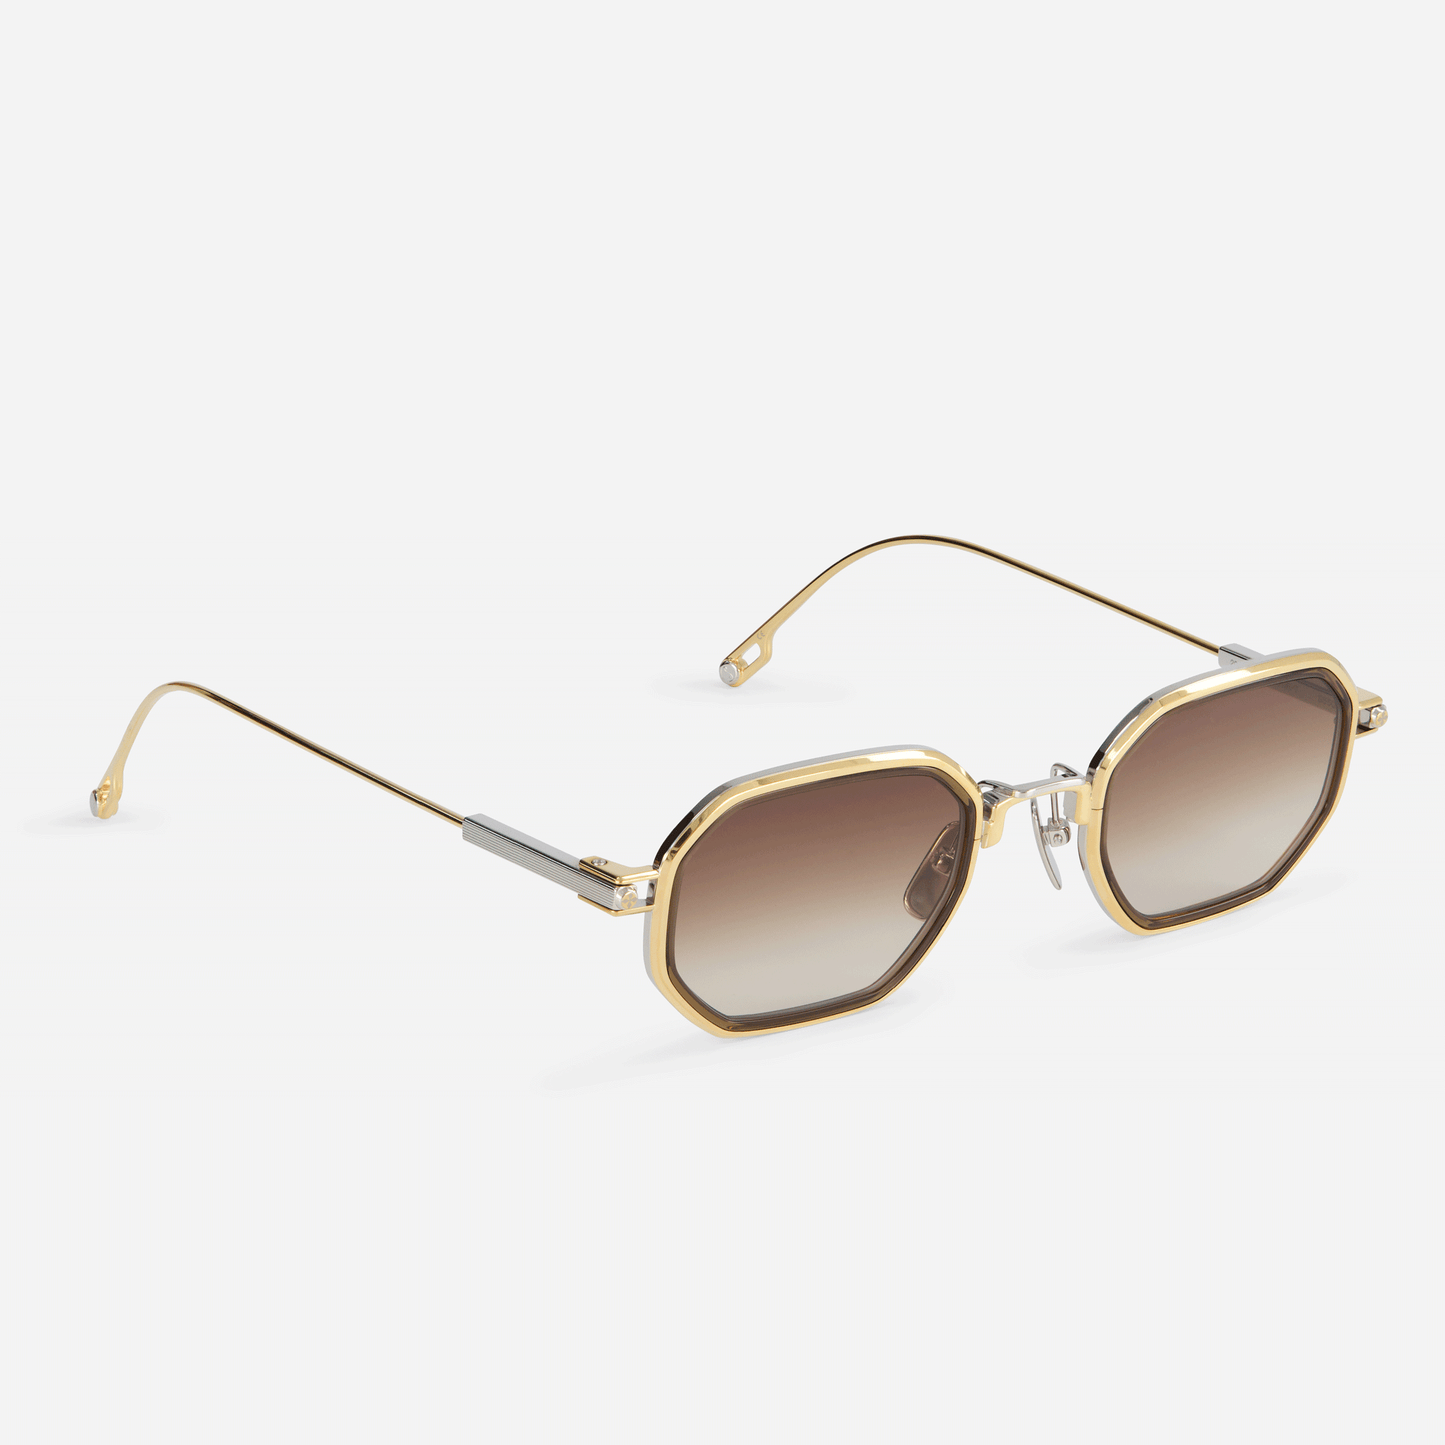  Timir-T S5503 glasses, meticulously crafted from pure titanium in yellow gold and platinum, enhanced by a rich chocolate brown Takiron insert and stunning gradient brown lenses.